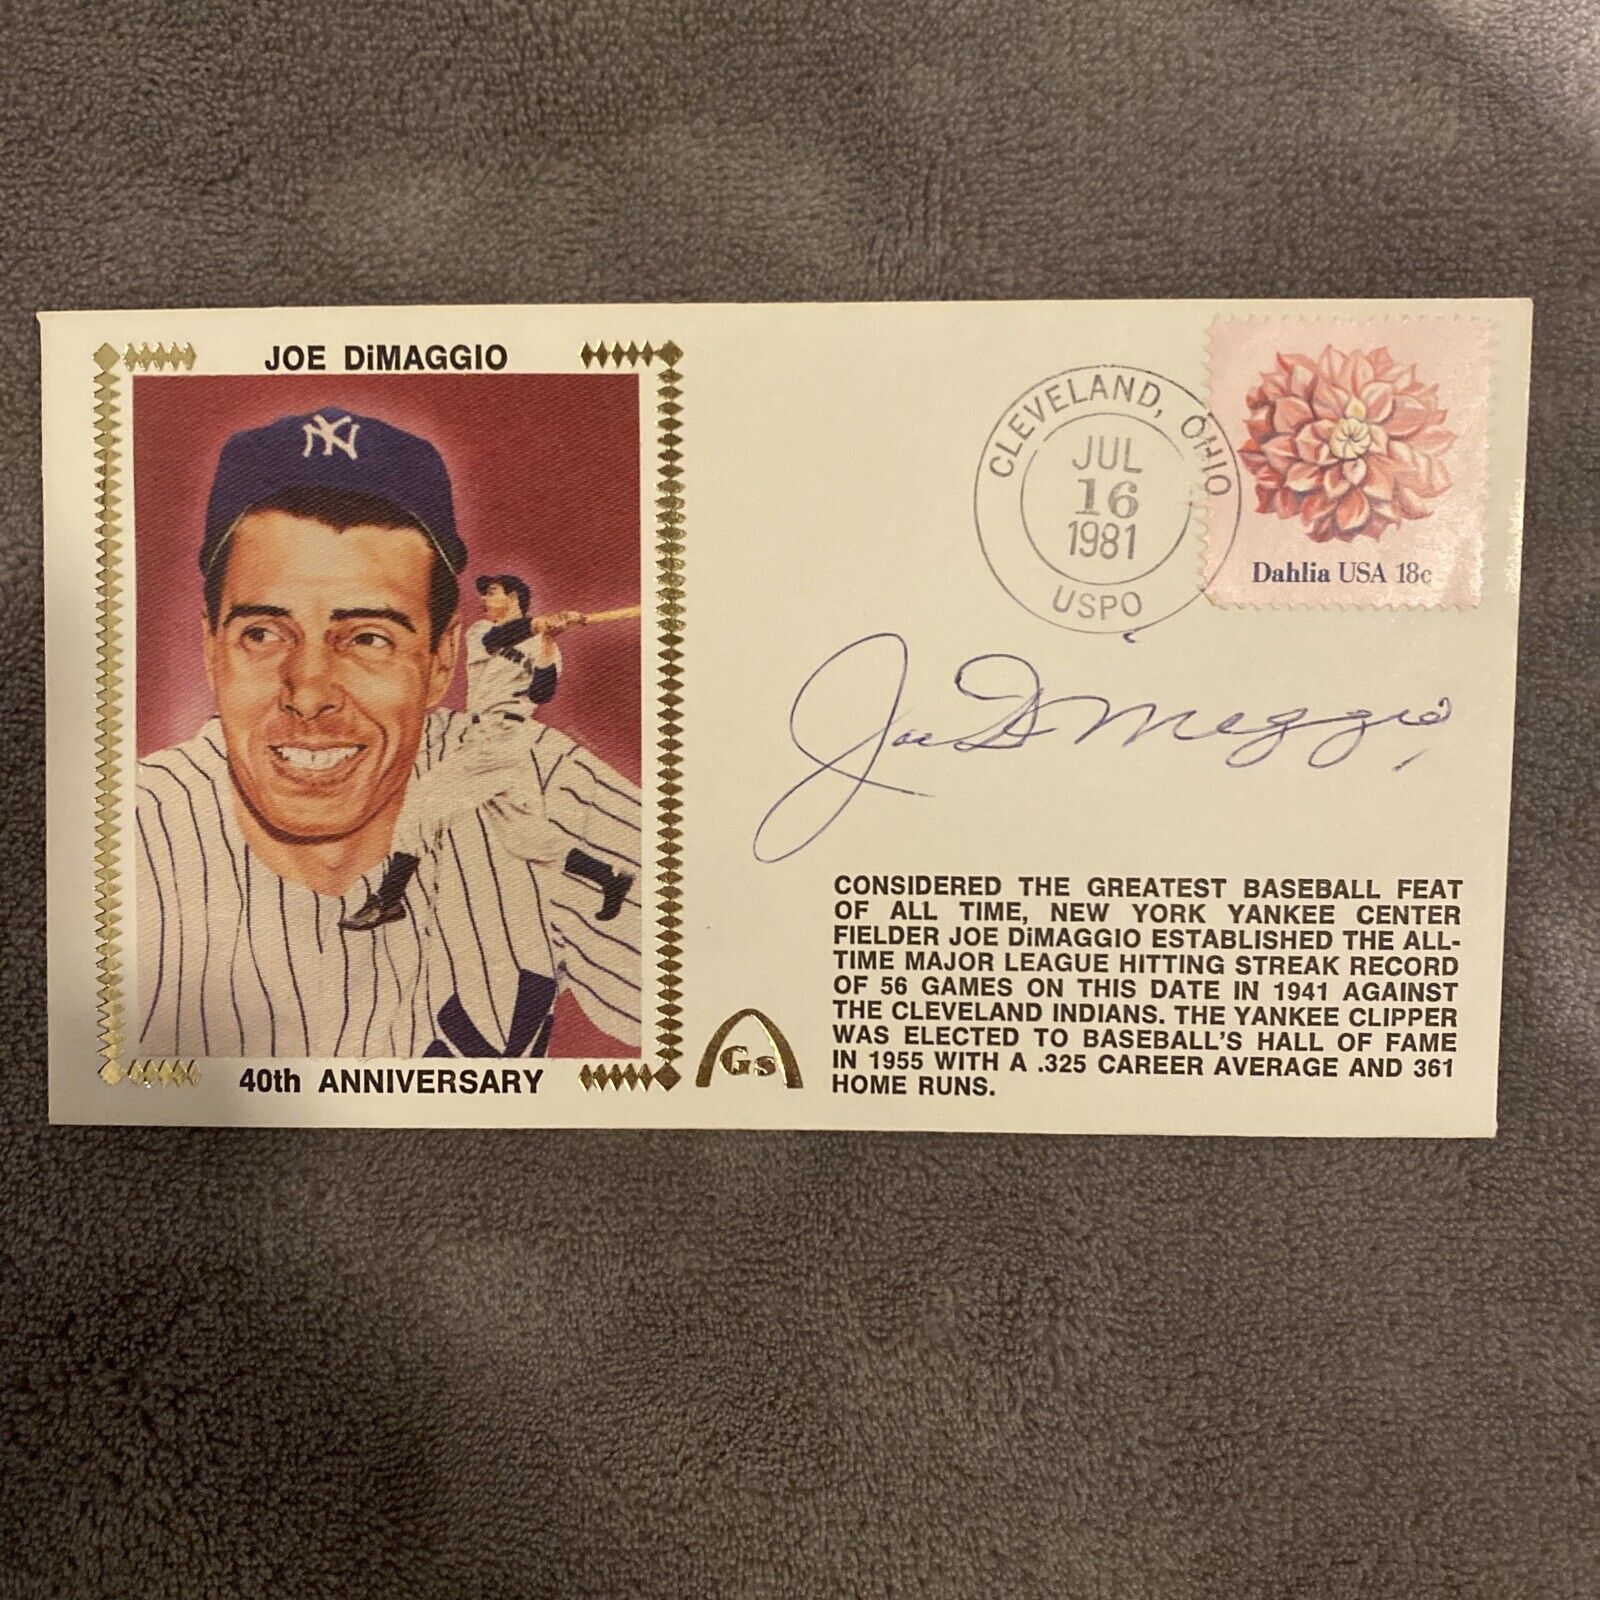 JOE DIMAGGIO Gateway Stamp First Day Cover Envelope Autograph 